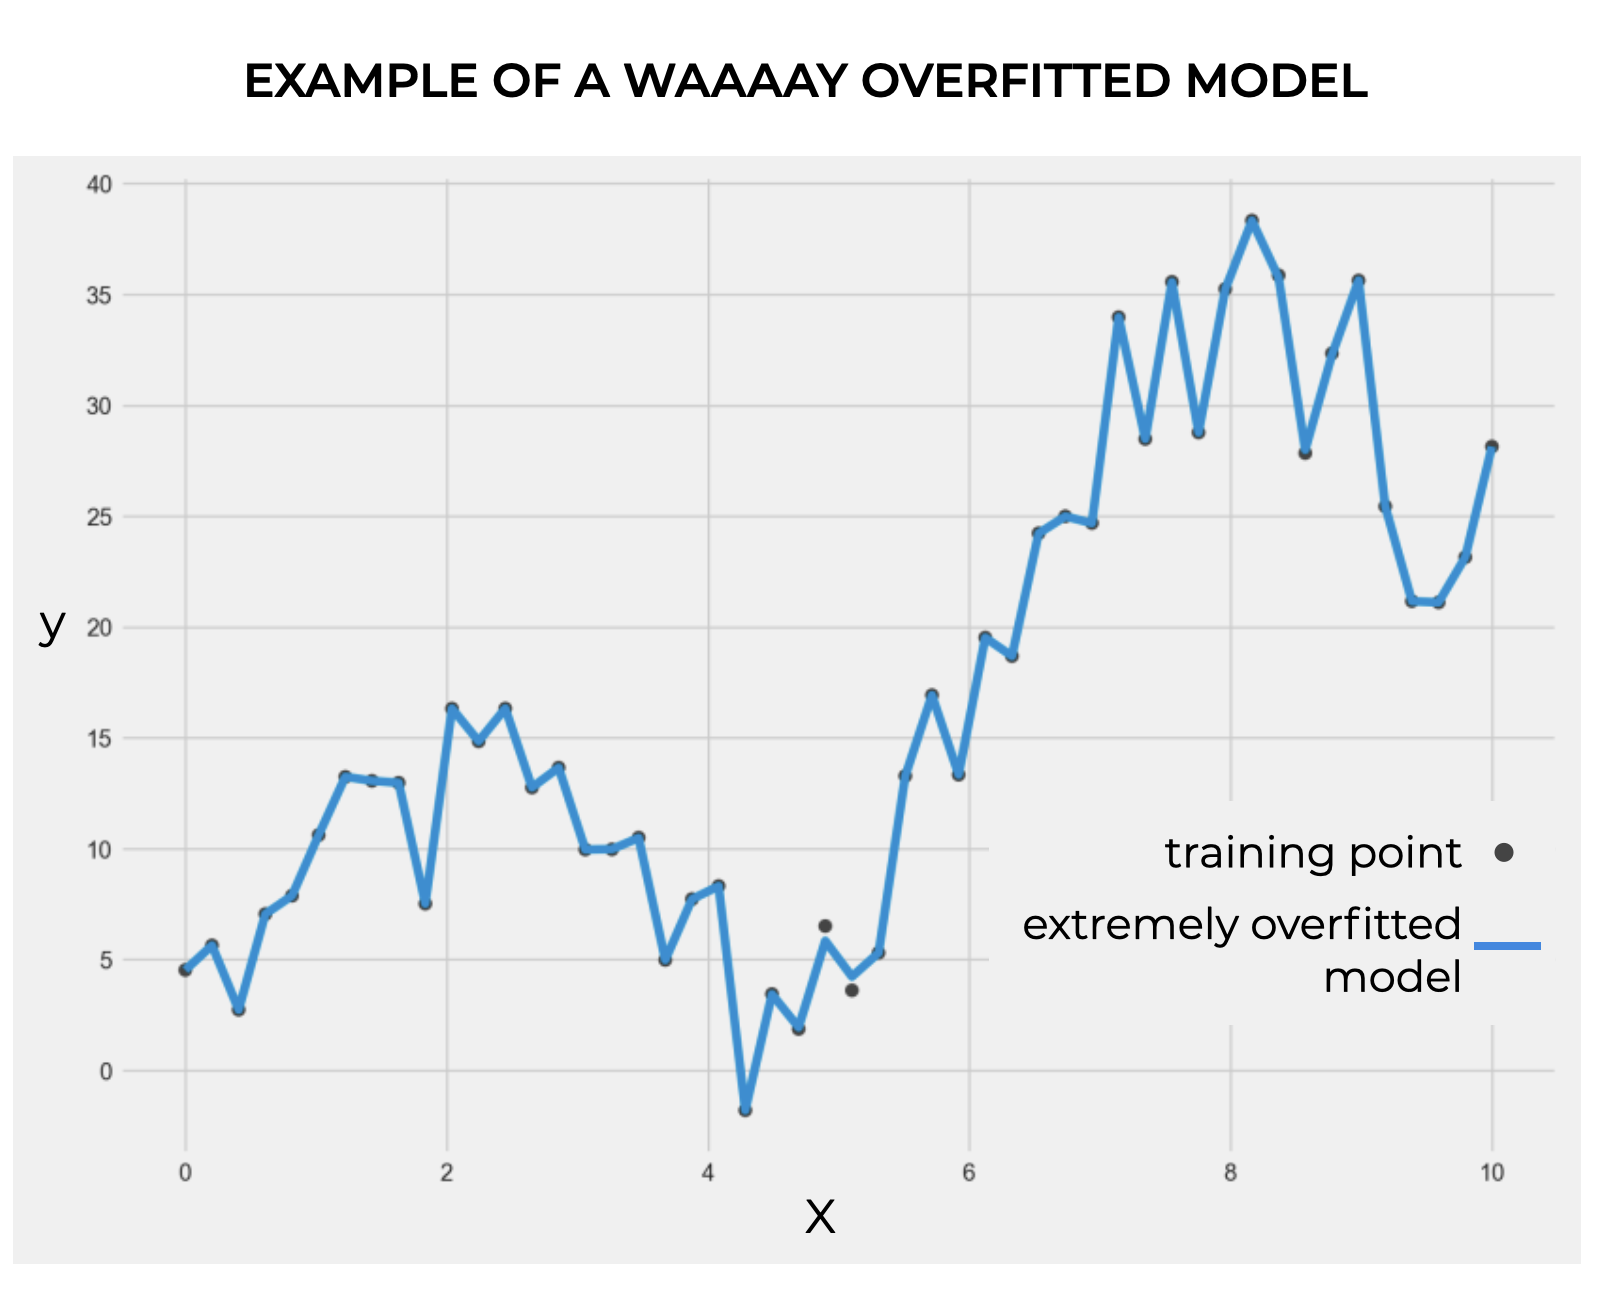 An example of a model that is strongly overfitting the training data to an extreme degree.